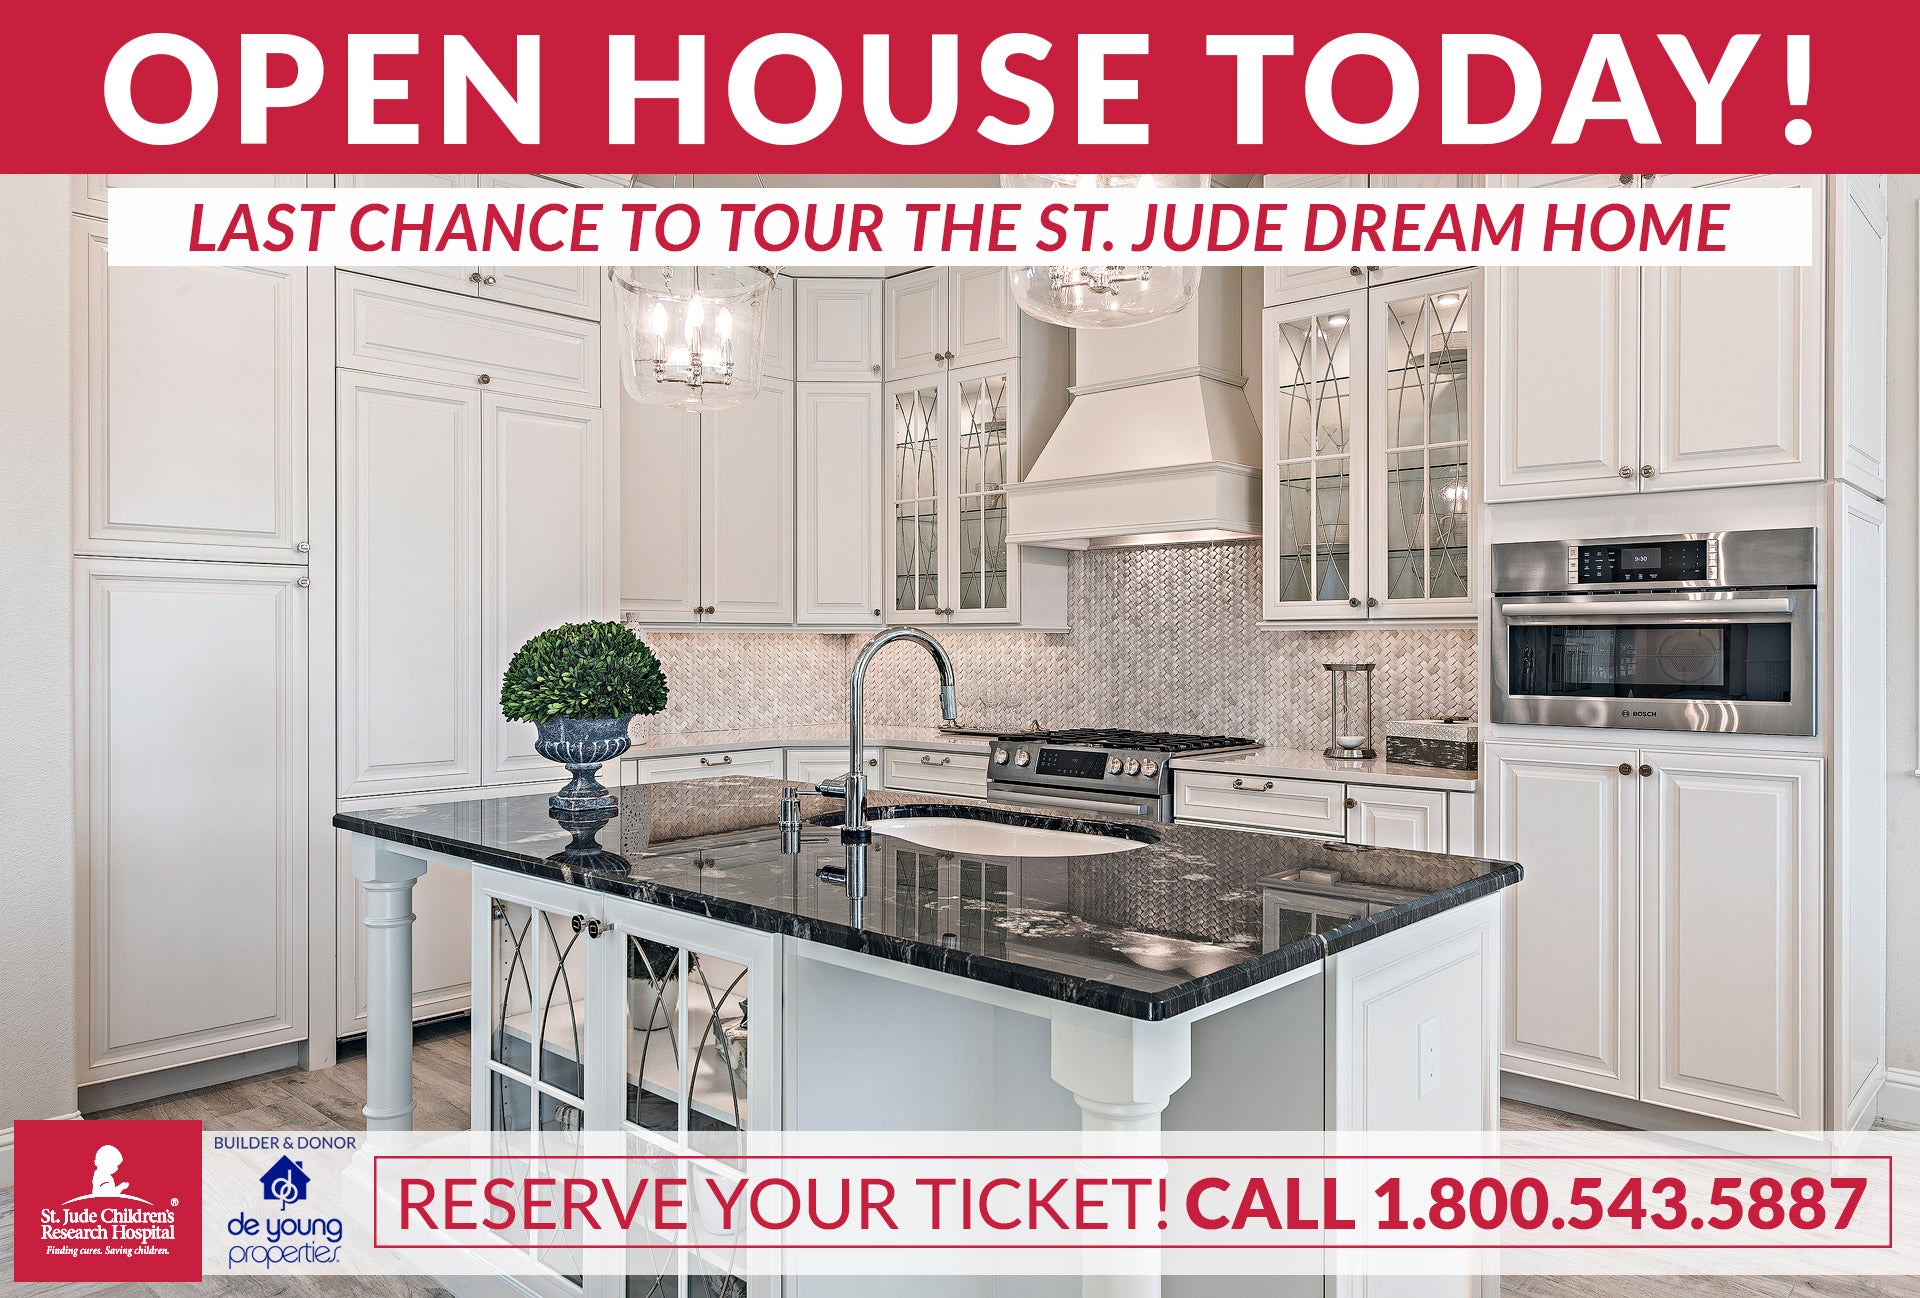 Last Chance To Tour The 2018 St. Jude Dream Home! Call (800) 543-5887 Today And Reserve Your Ticket!